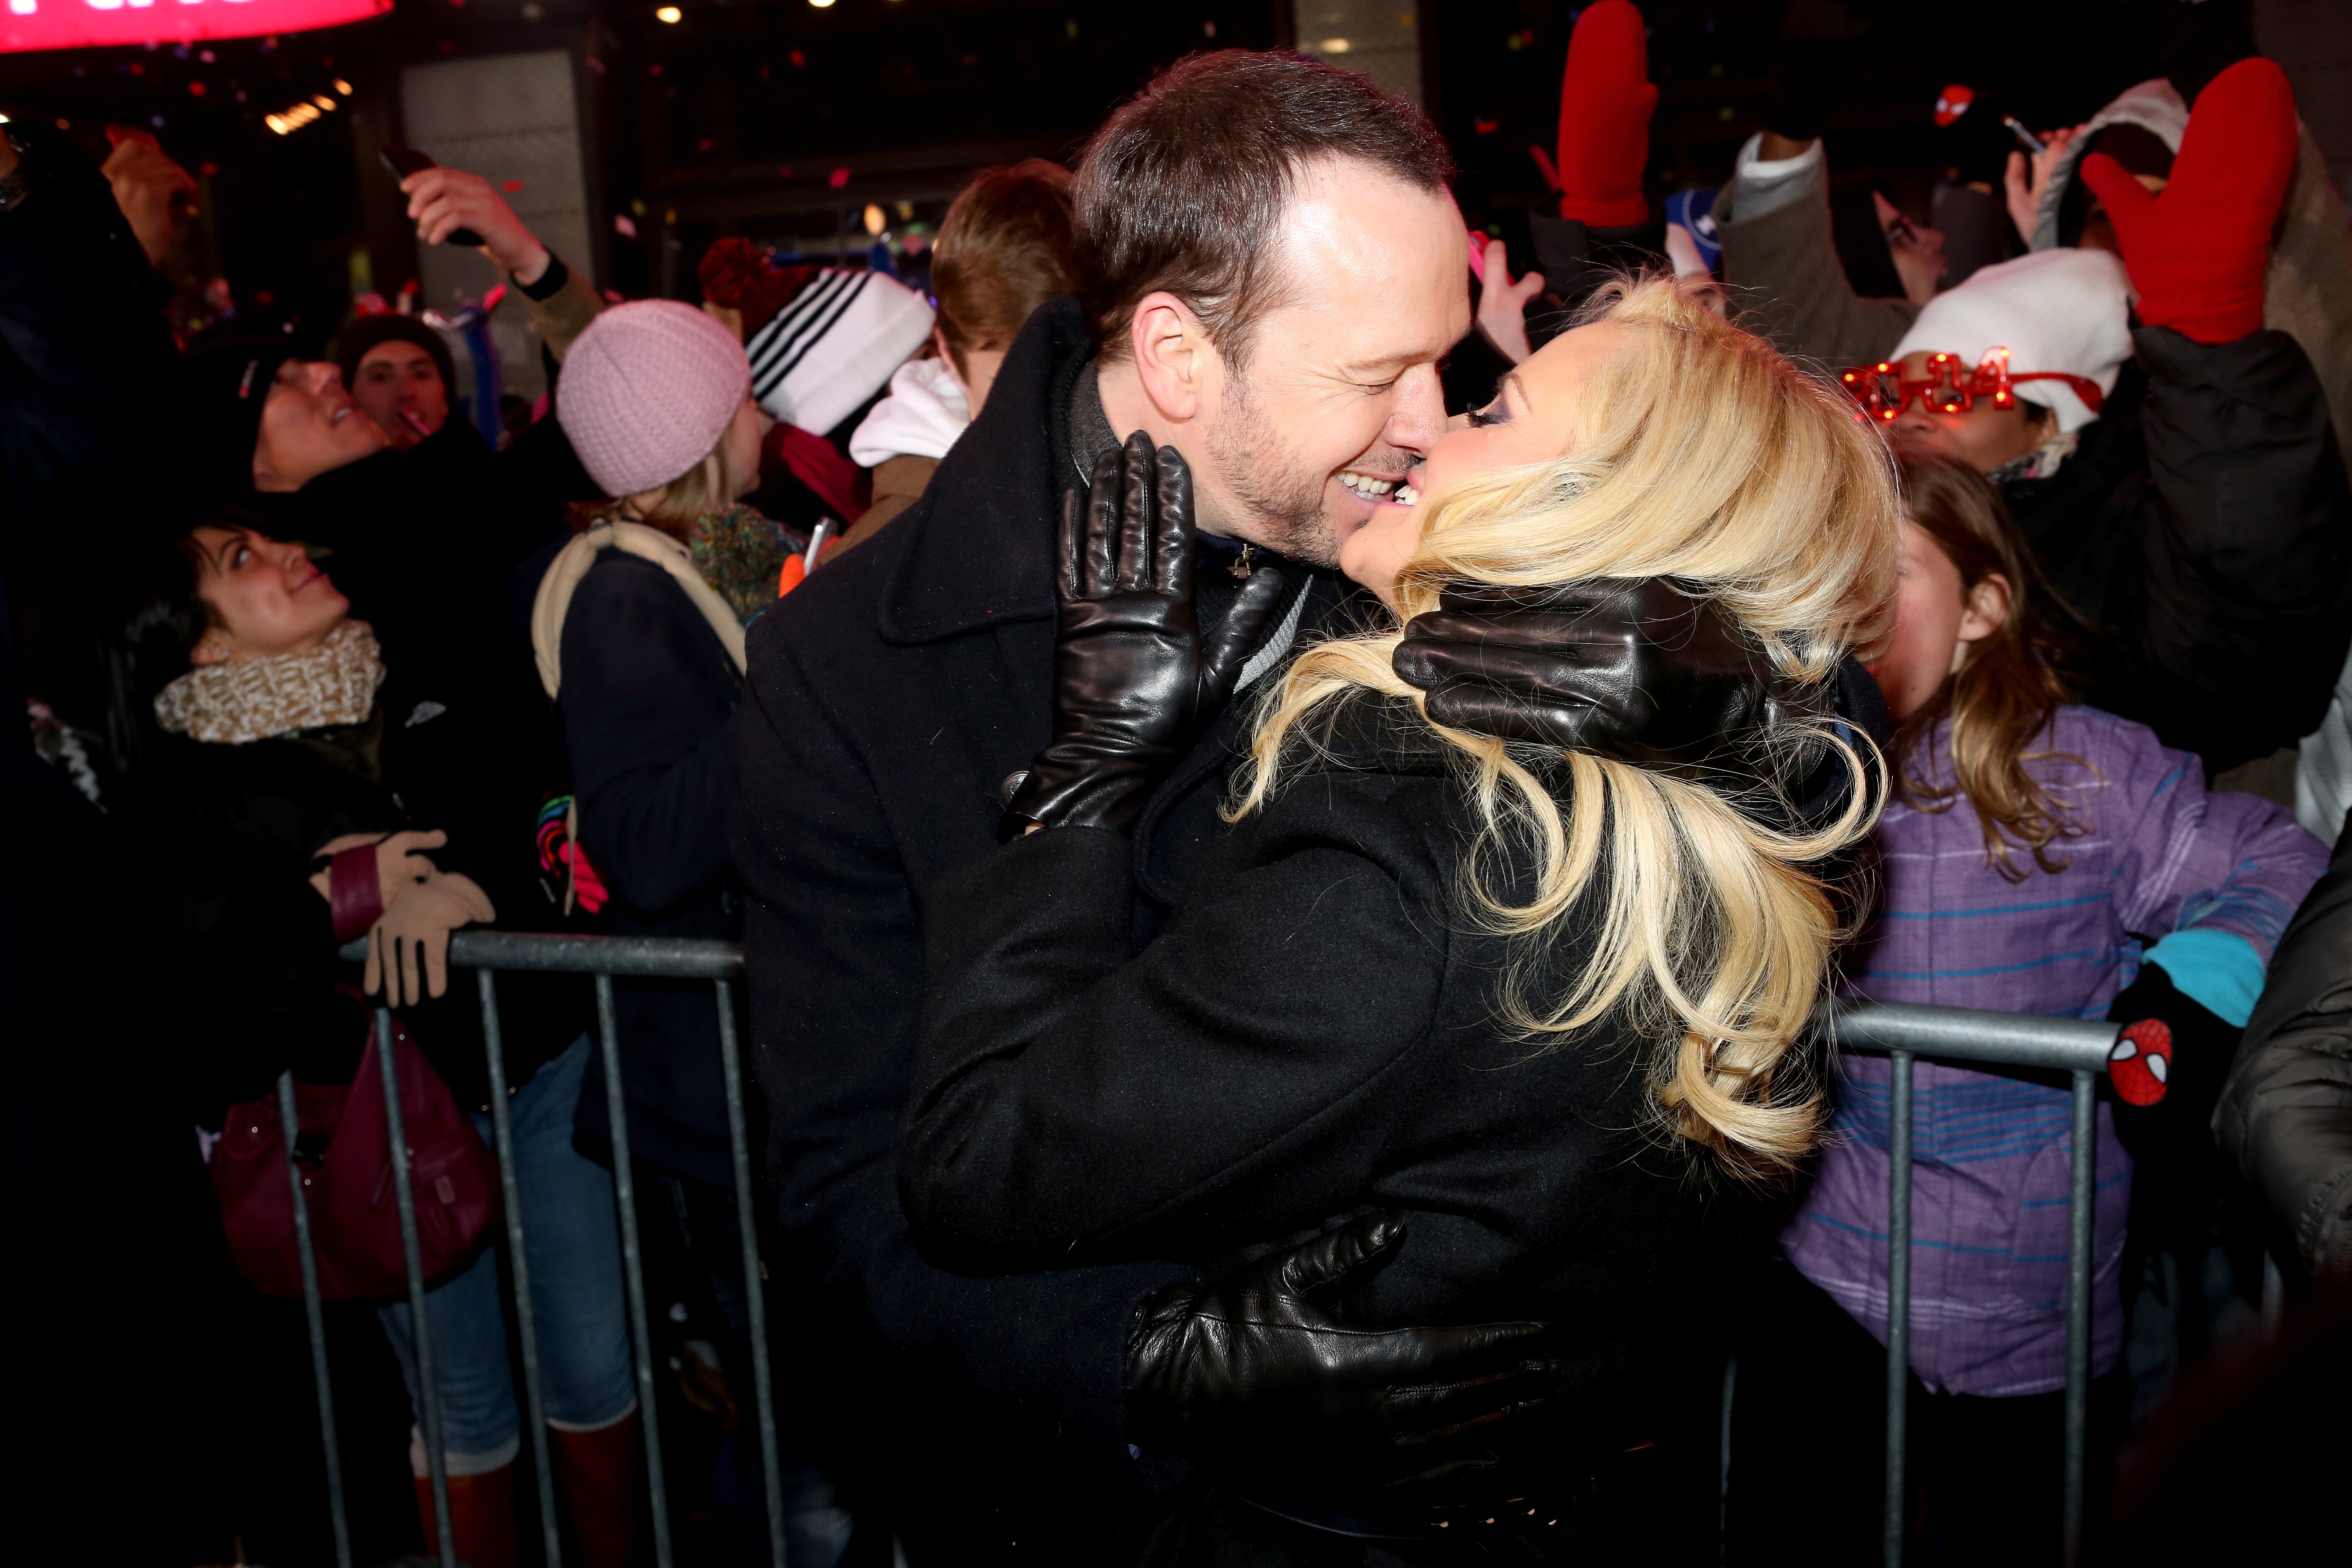 Donnie Wahlberg and Jenny Mccarthy attend Dick Clark's New Year's Rockin' Eve with Ryan Seacrest 2014 on December 31, 2013 in New York, New York | Source: Getty Images